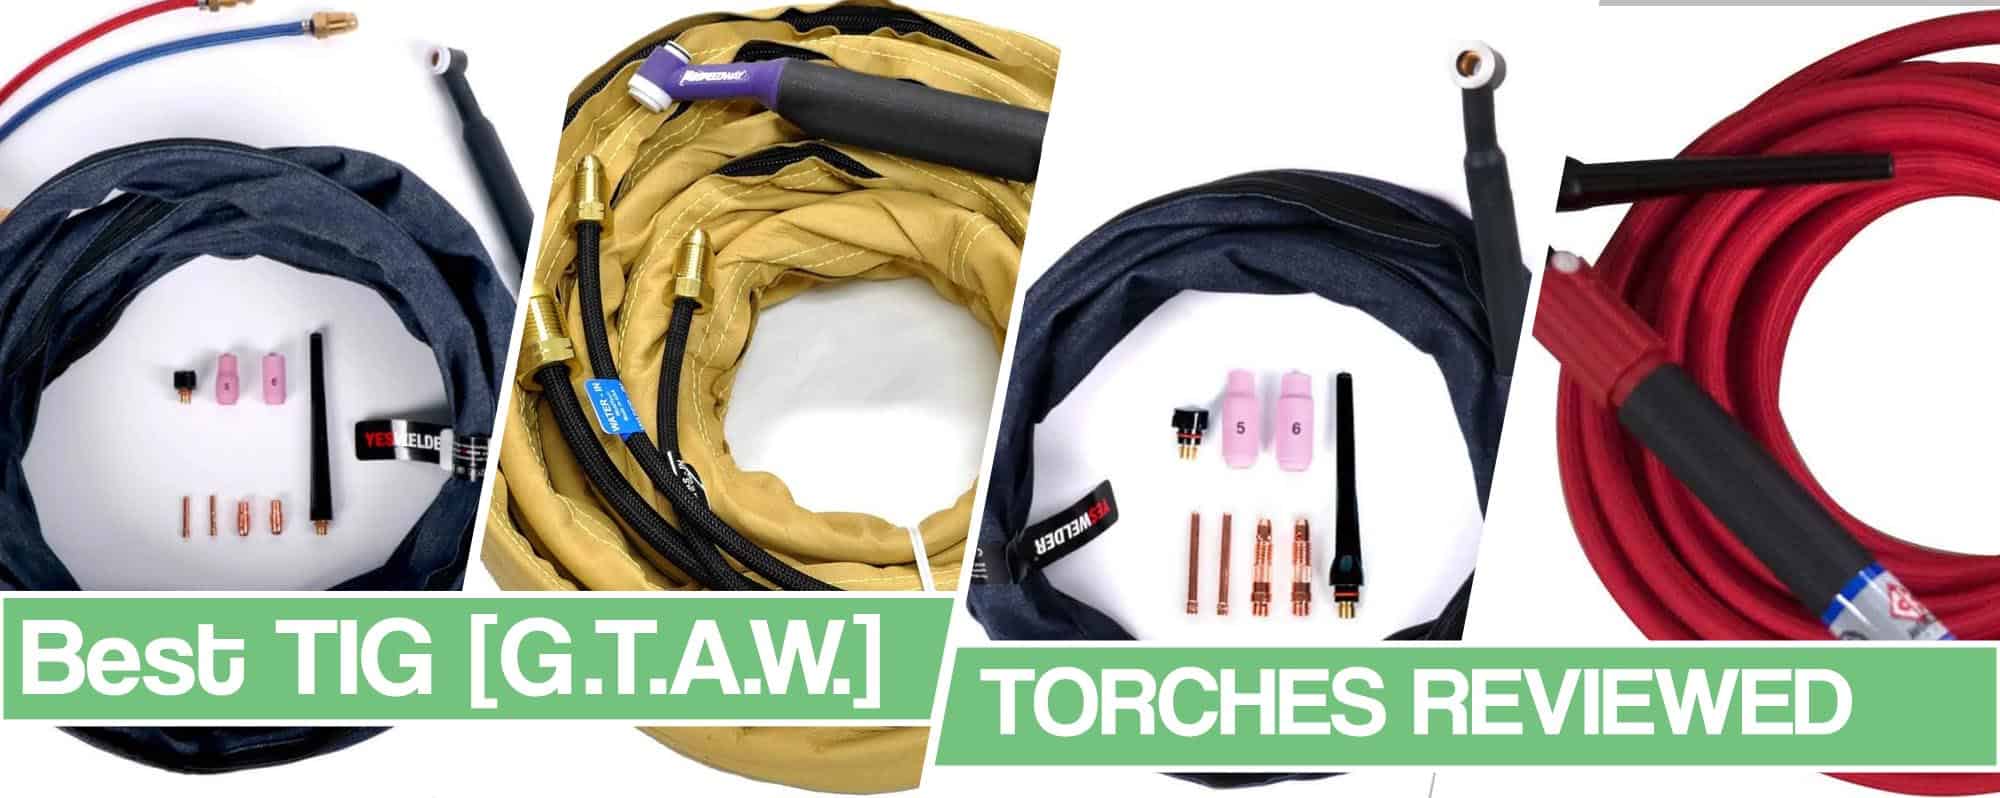 Feature image for Best TIG Torches article